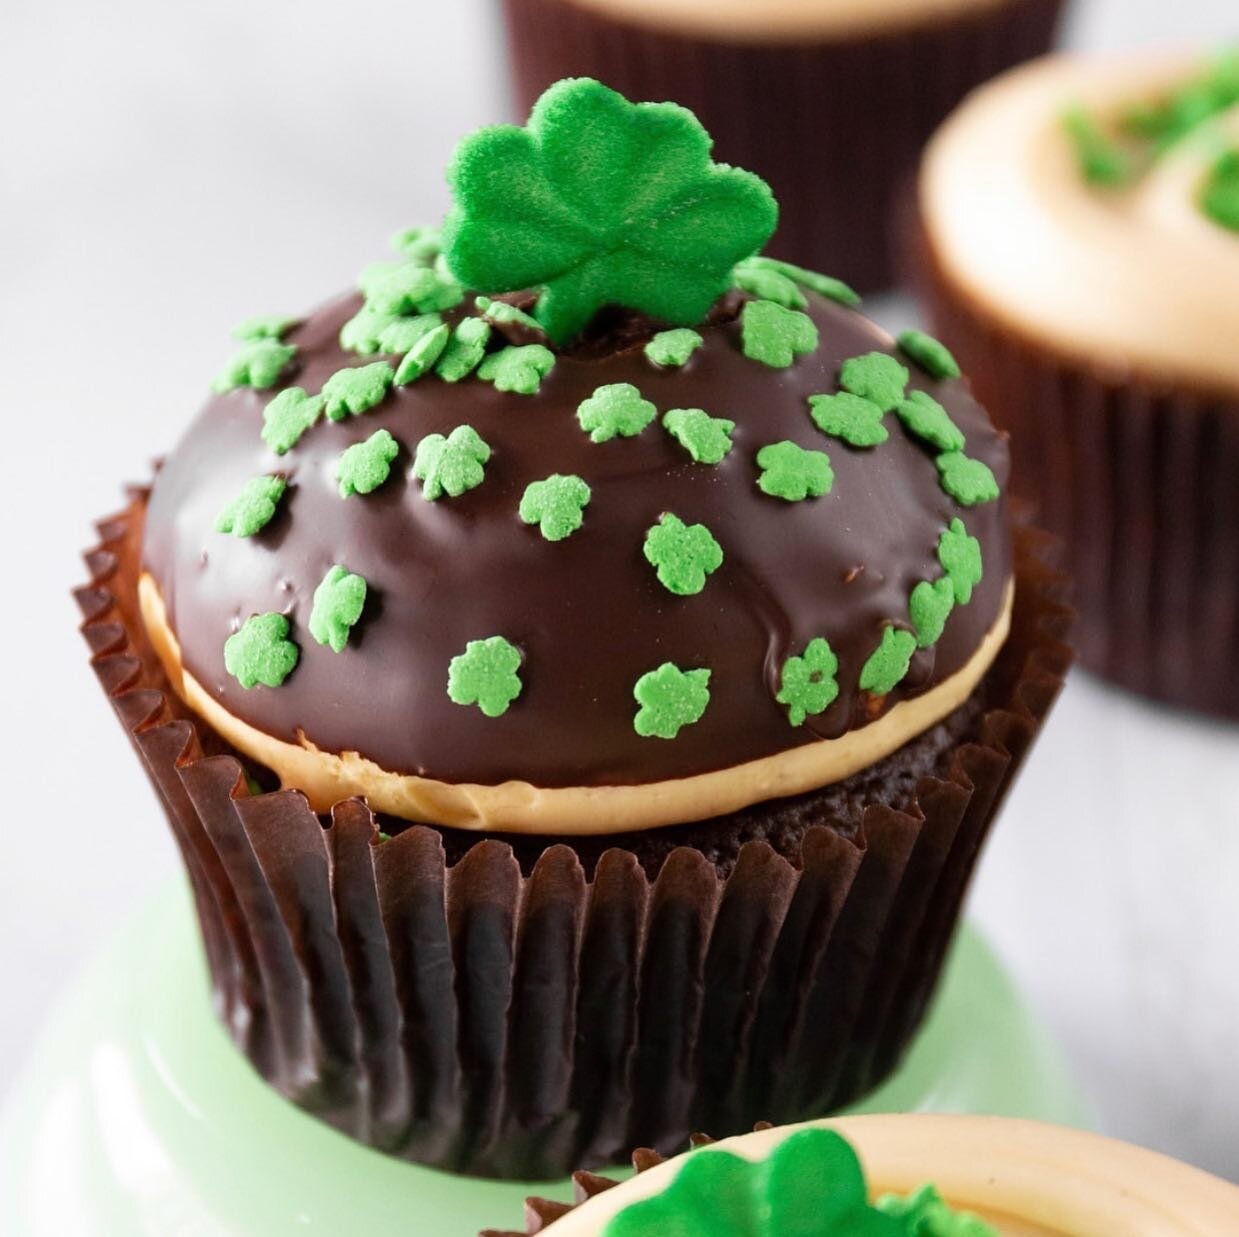 Guinness, Chocolate Stout, Pistachio, and a NEW EMERALD ISLE Green River inspired cupcake are officially available starting today!!💚🍀

📸: @amy.sheree #livelifeonecupcakeatatime #designerdessertsbakery